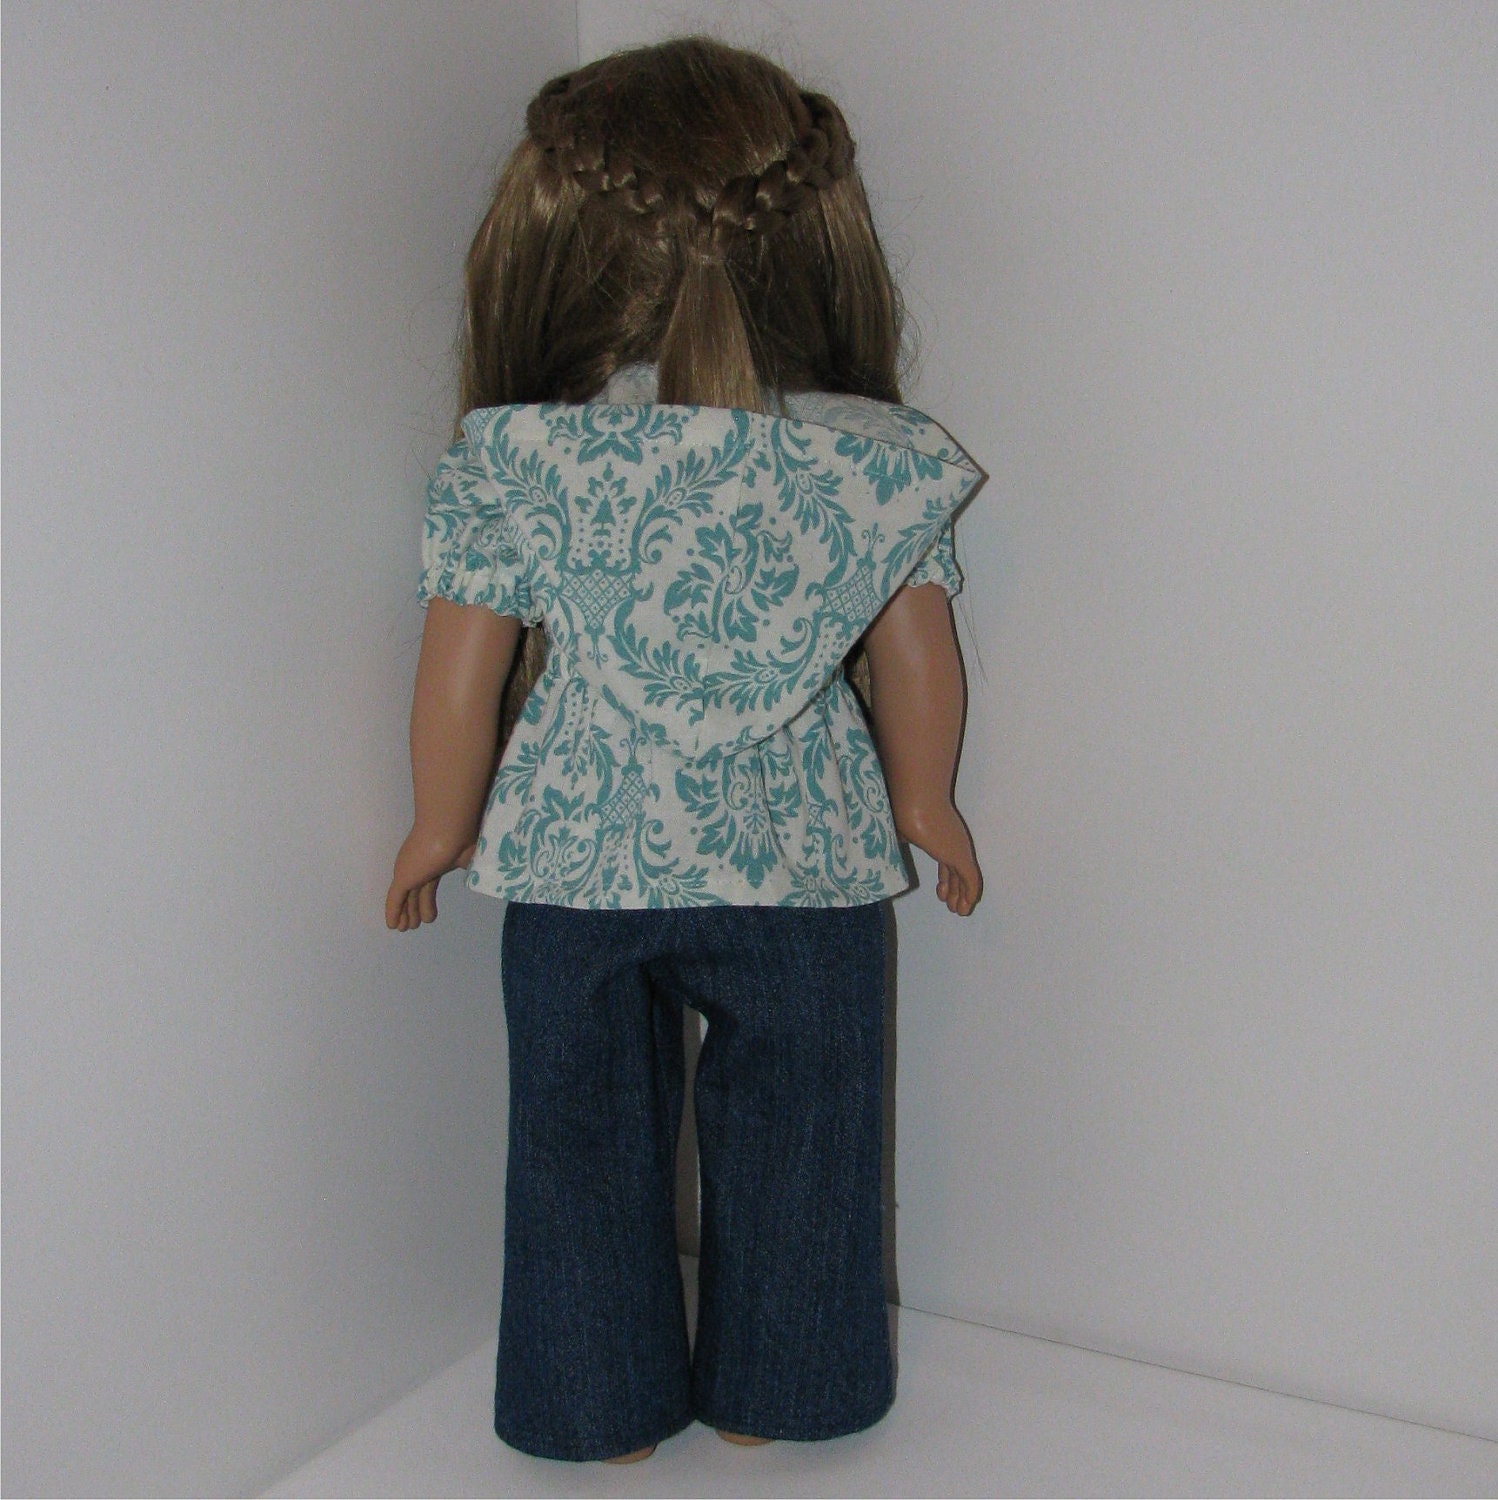 Jeans and Teal Damask Hooded Blouse, Fits American Girl and 18 Inch Dolls